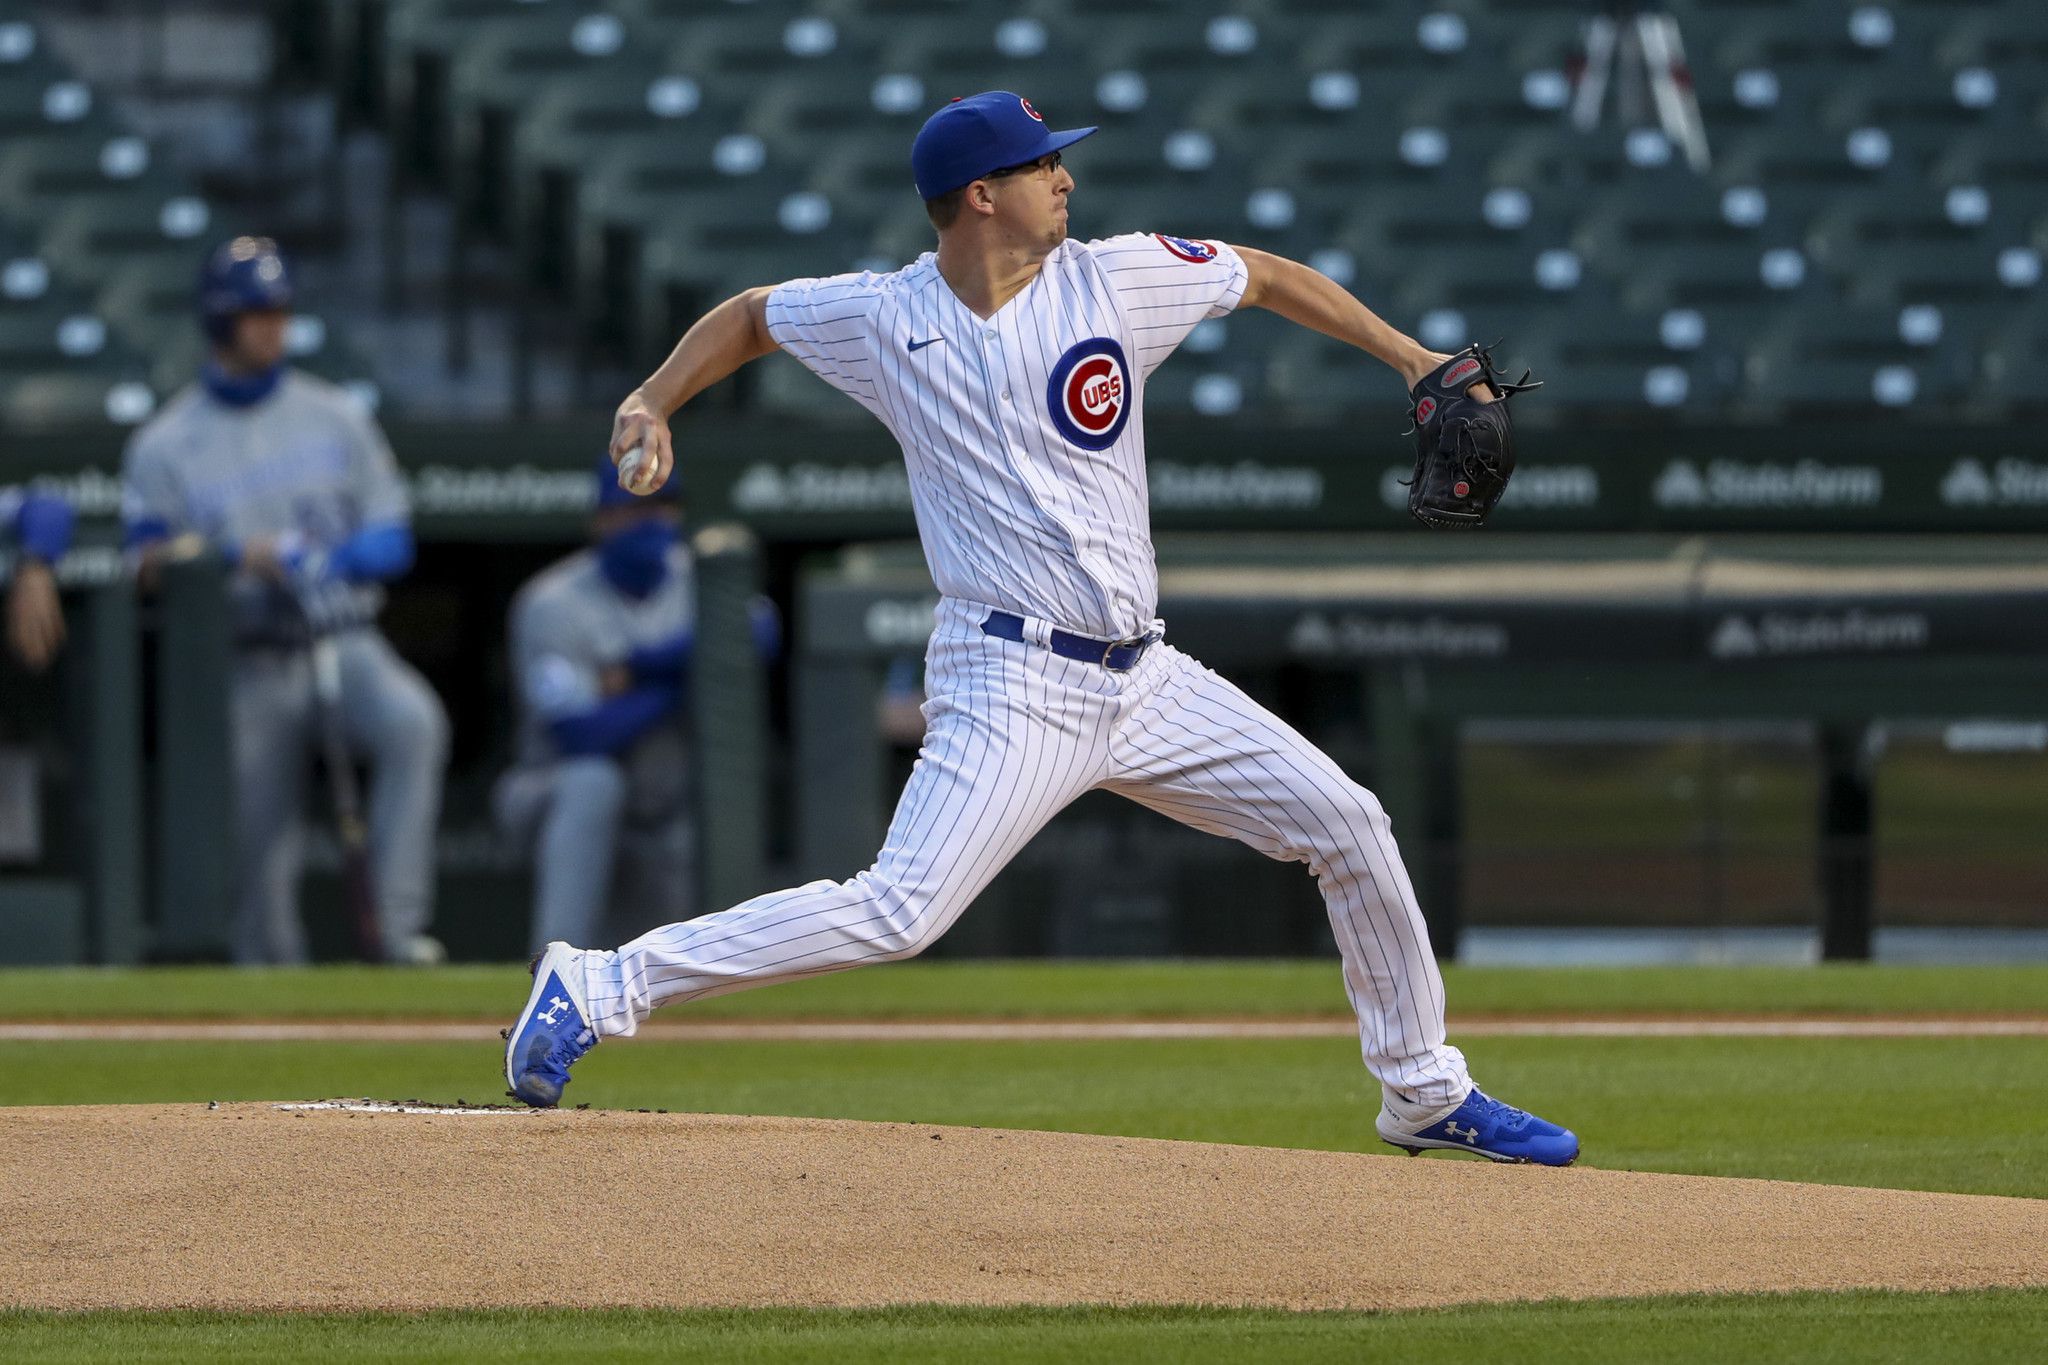 What just happened?': Alec Mills, Cubs reflect on 2-year